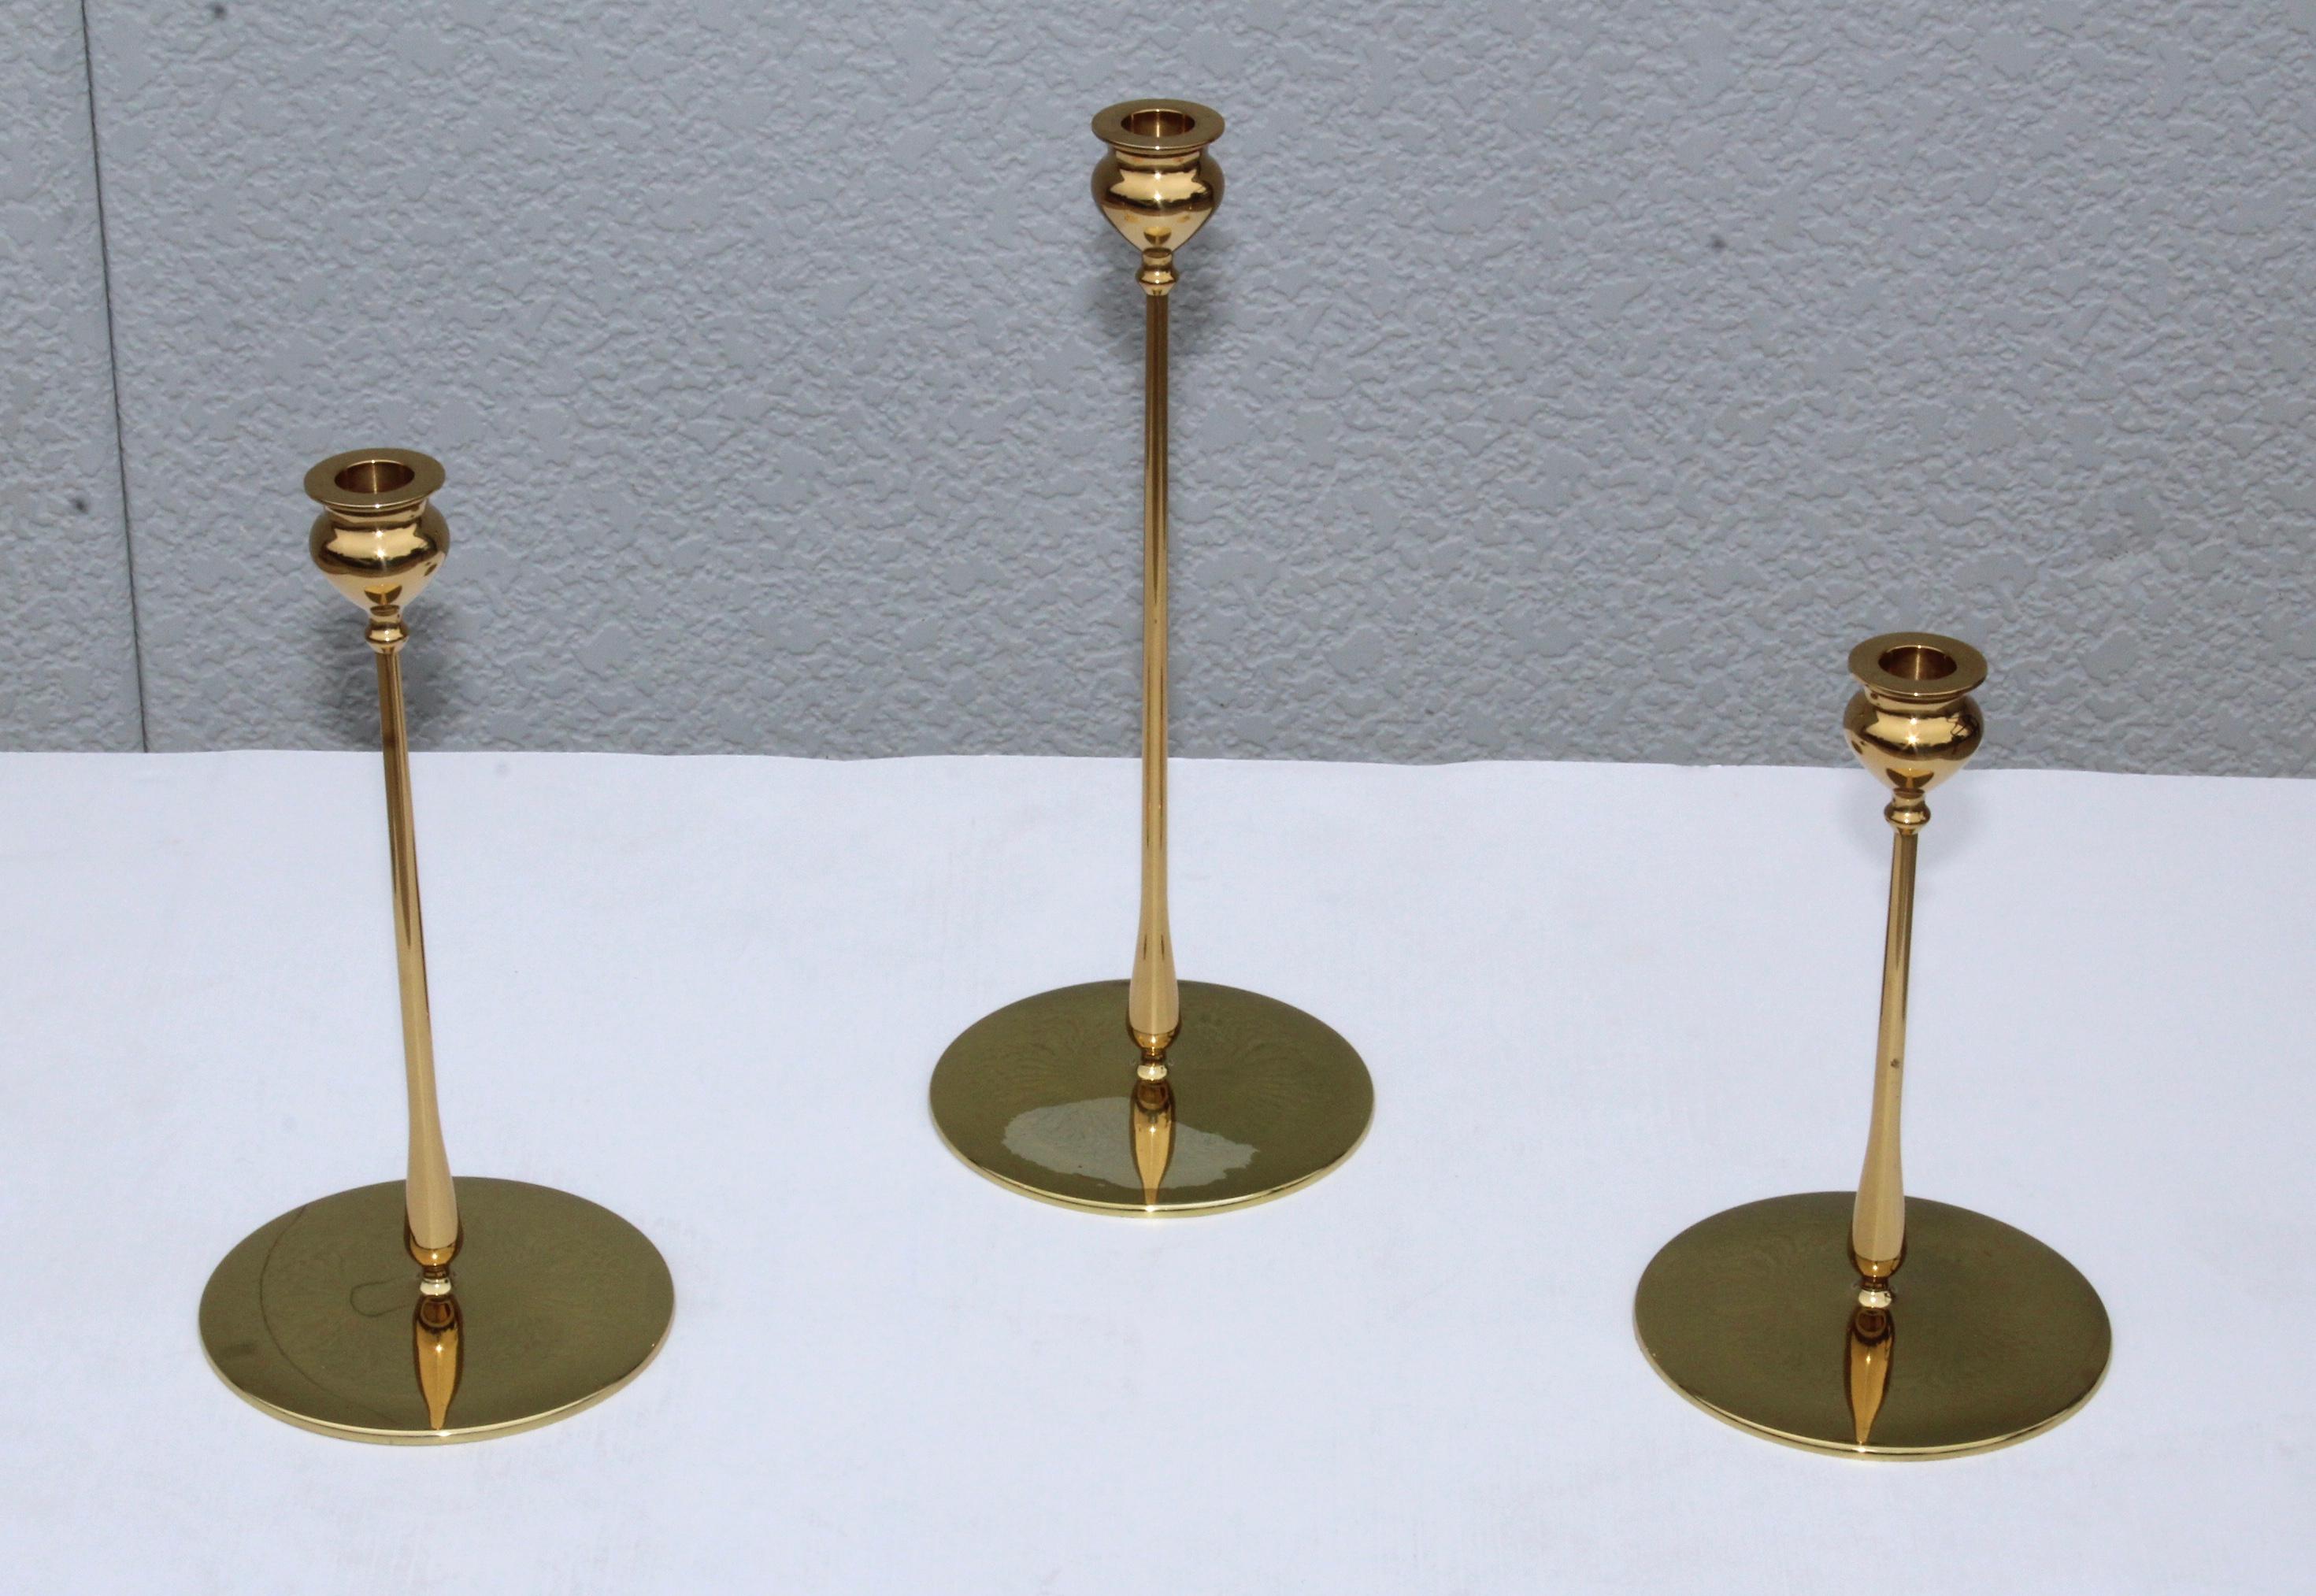 Stunning set of 3 art & crafts Delta candlesticks after Robert Jarvie made by Virginia Metalcrafters in 1998. in original condition, with minor wear and patina to the brass, there is some wear to the finish of one of them.

Medium candlesticks